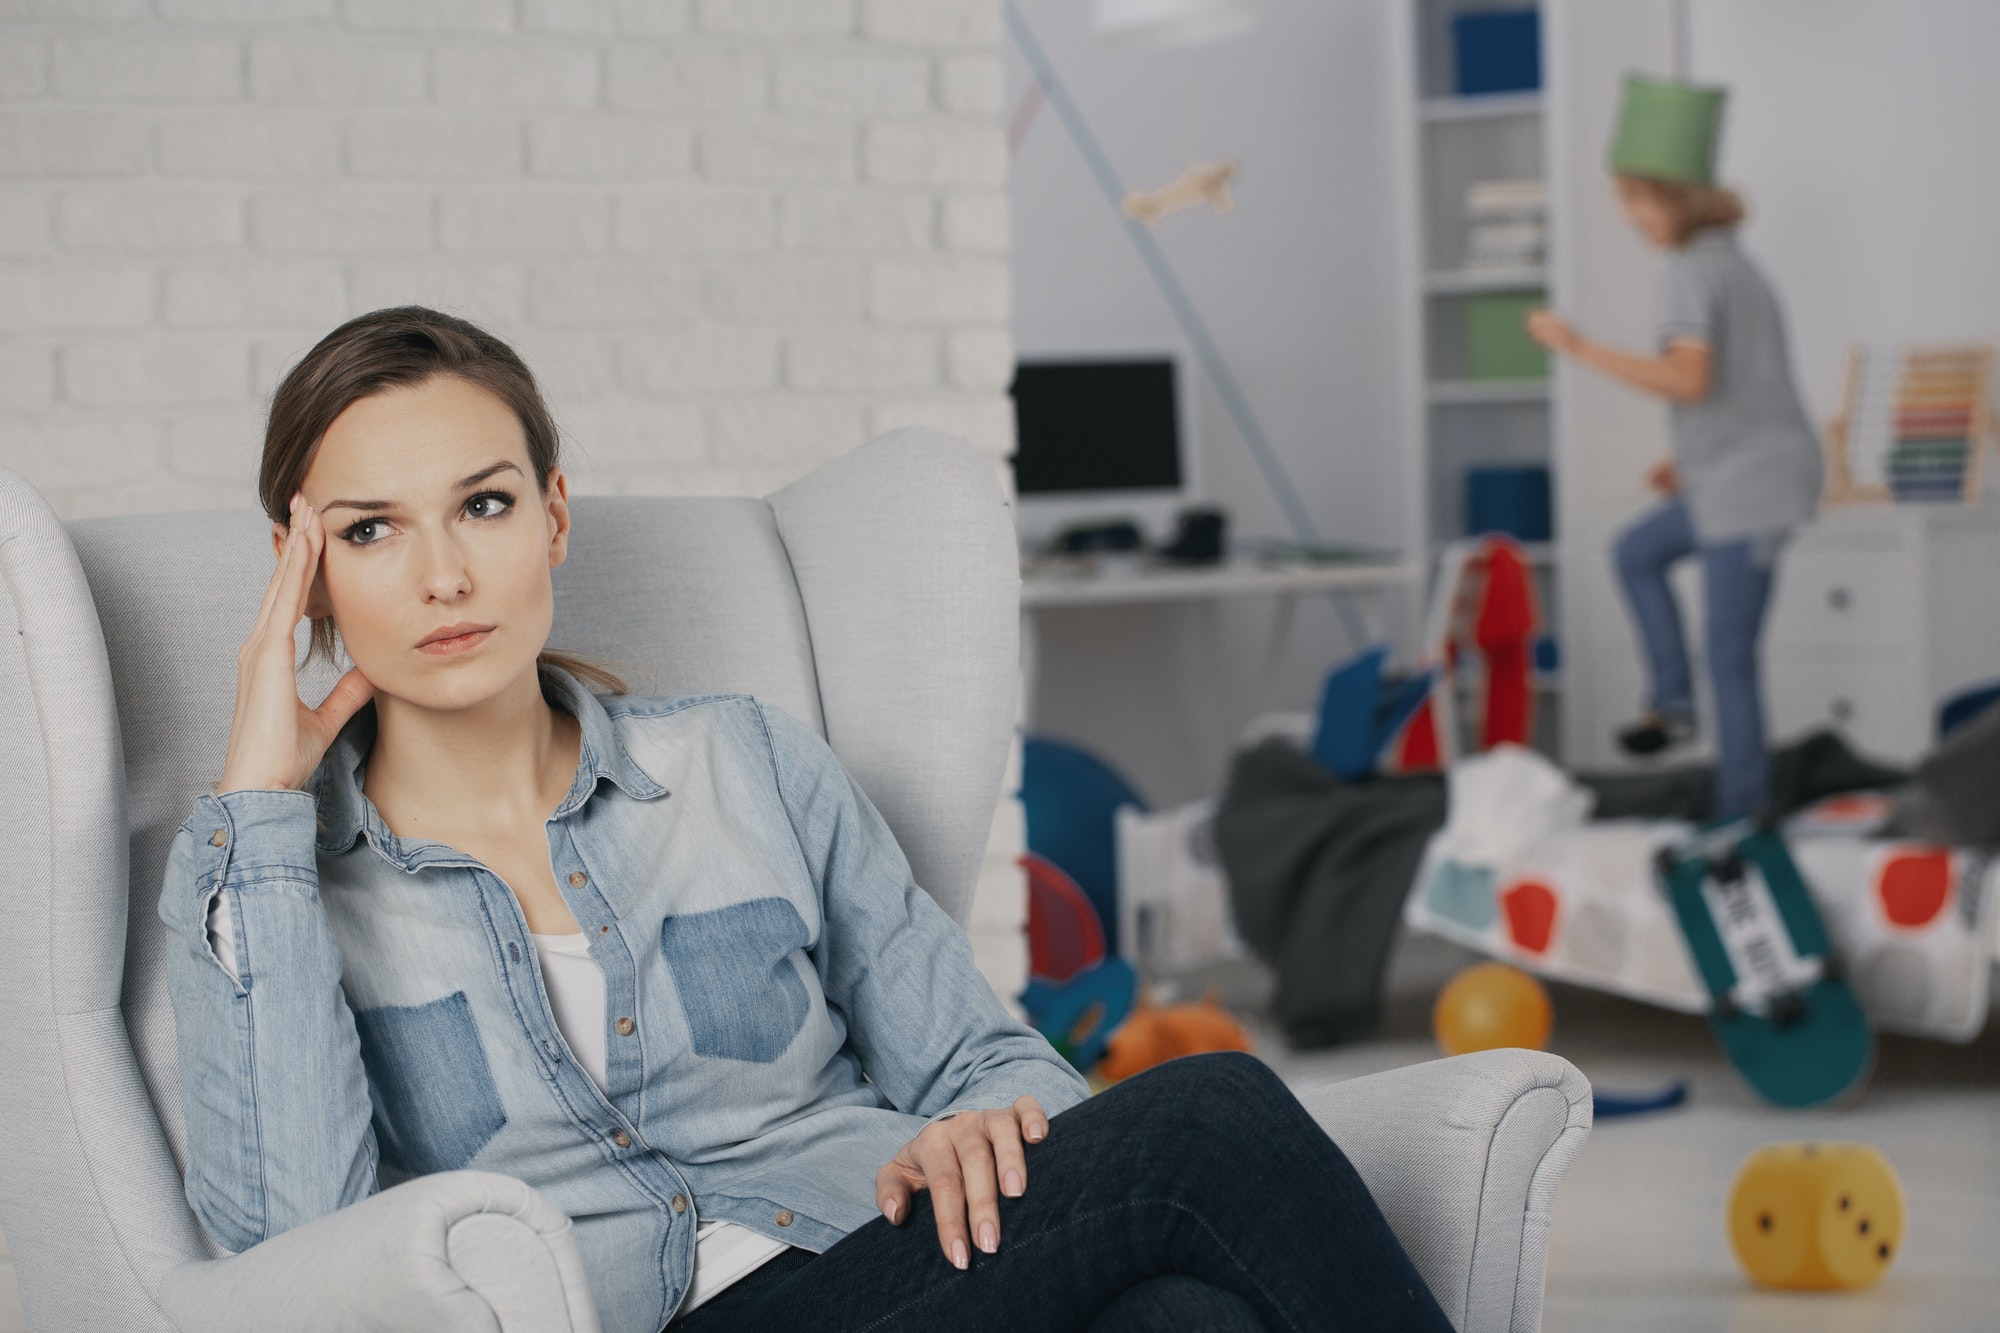 Worried mother relaxing on armchair while son with adhd making a